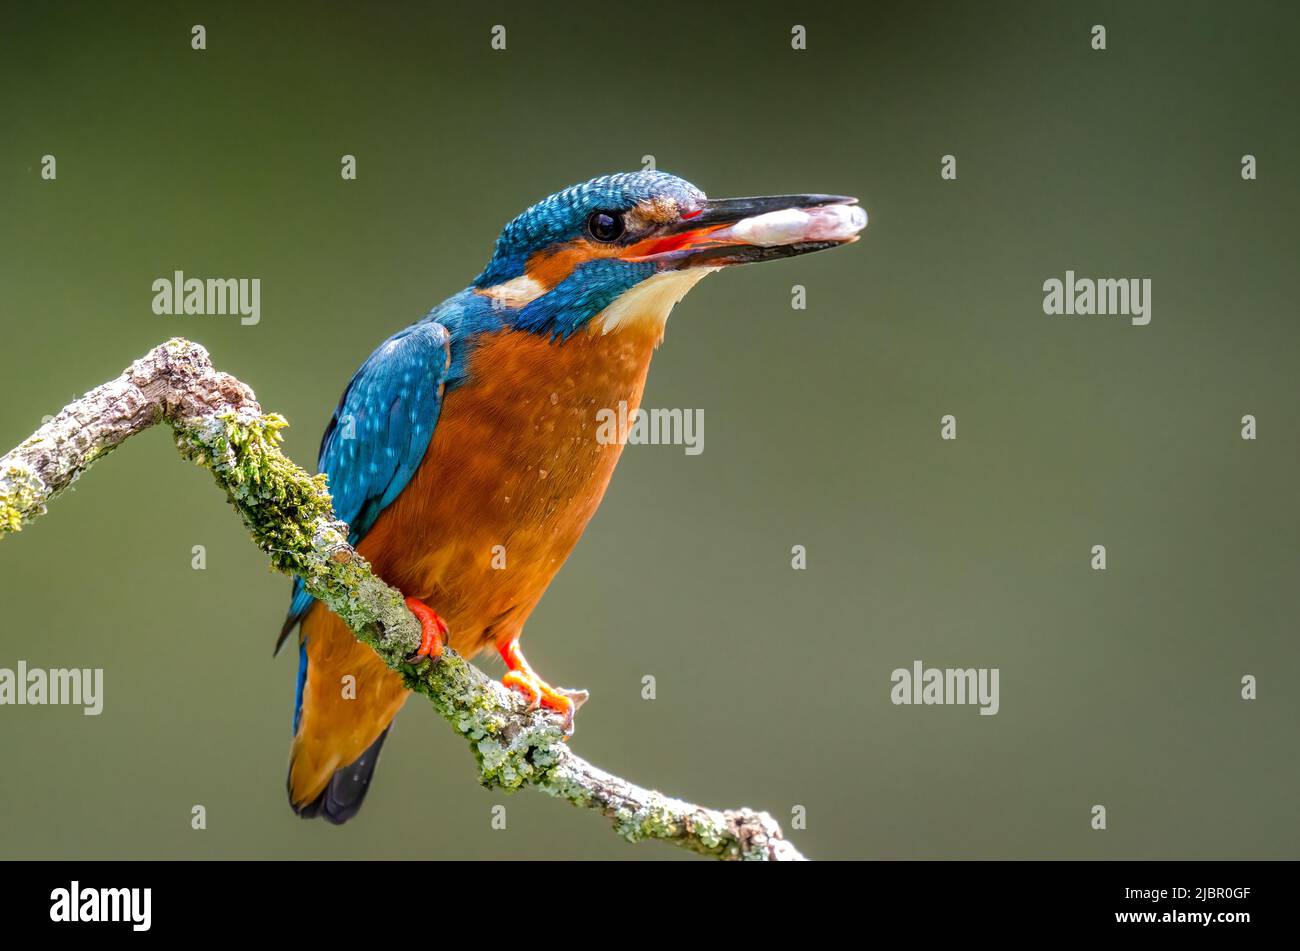 A male kingfisher, Alcedo atthis, as it is perched on an old branch. He has a fish in his beak and a clear background Stock Photo